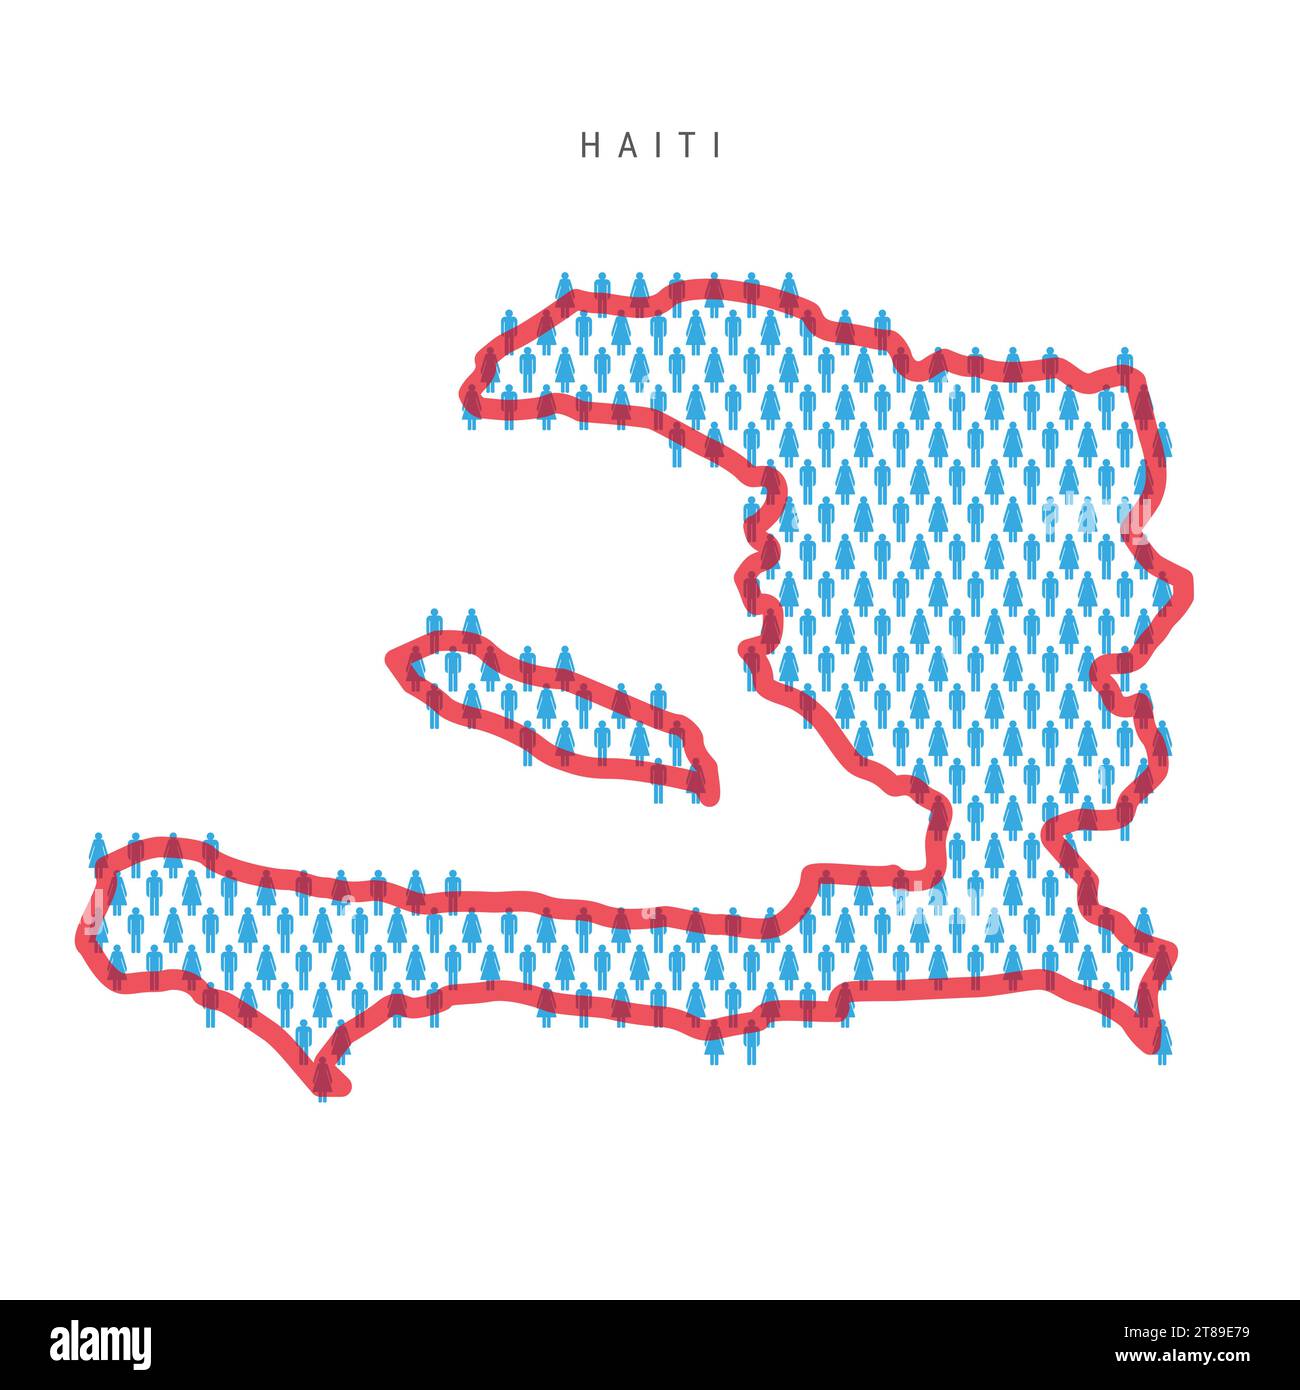 Haiti population map. Stick figures Haitian people map with bold red translucent country border. Pattern of men and women icons. Isolated vector illus Stock Vector